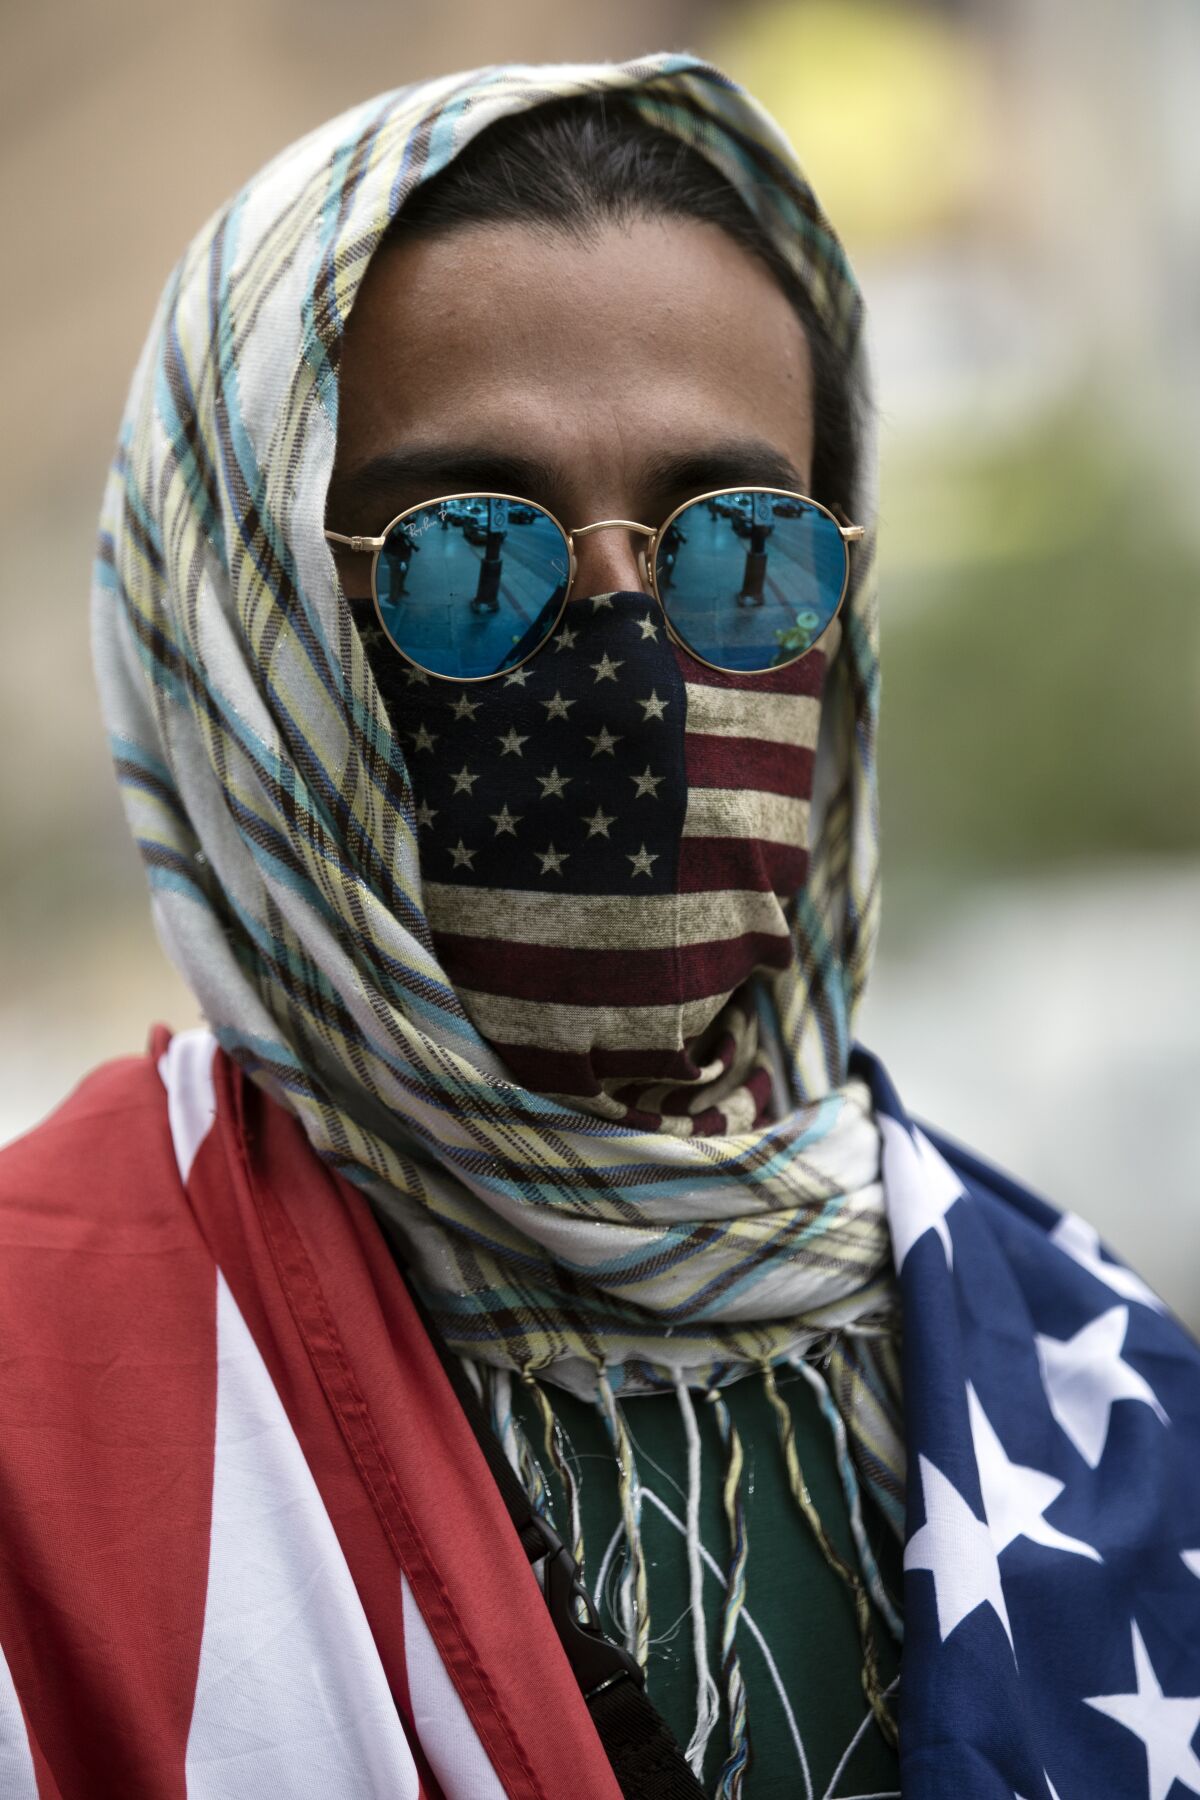 A protestor wears an American flag mask at a Hollywood demonstration.